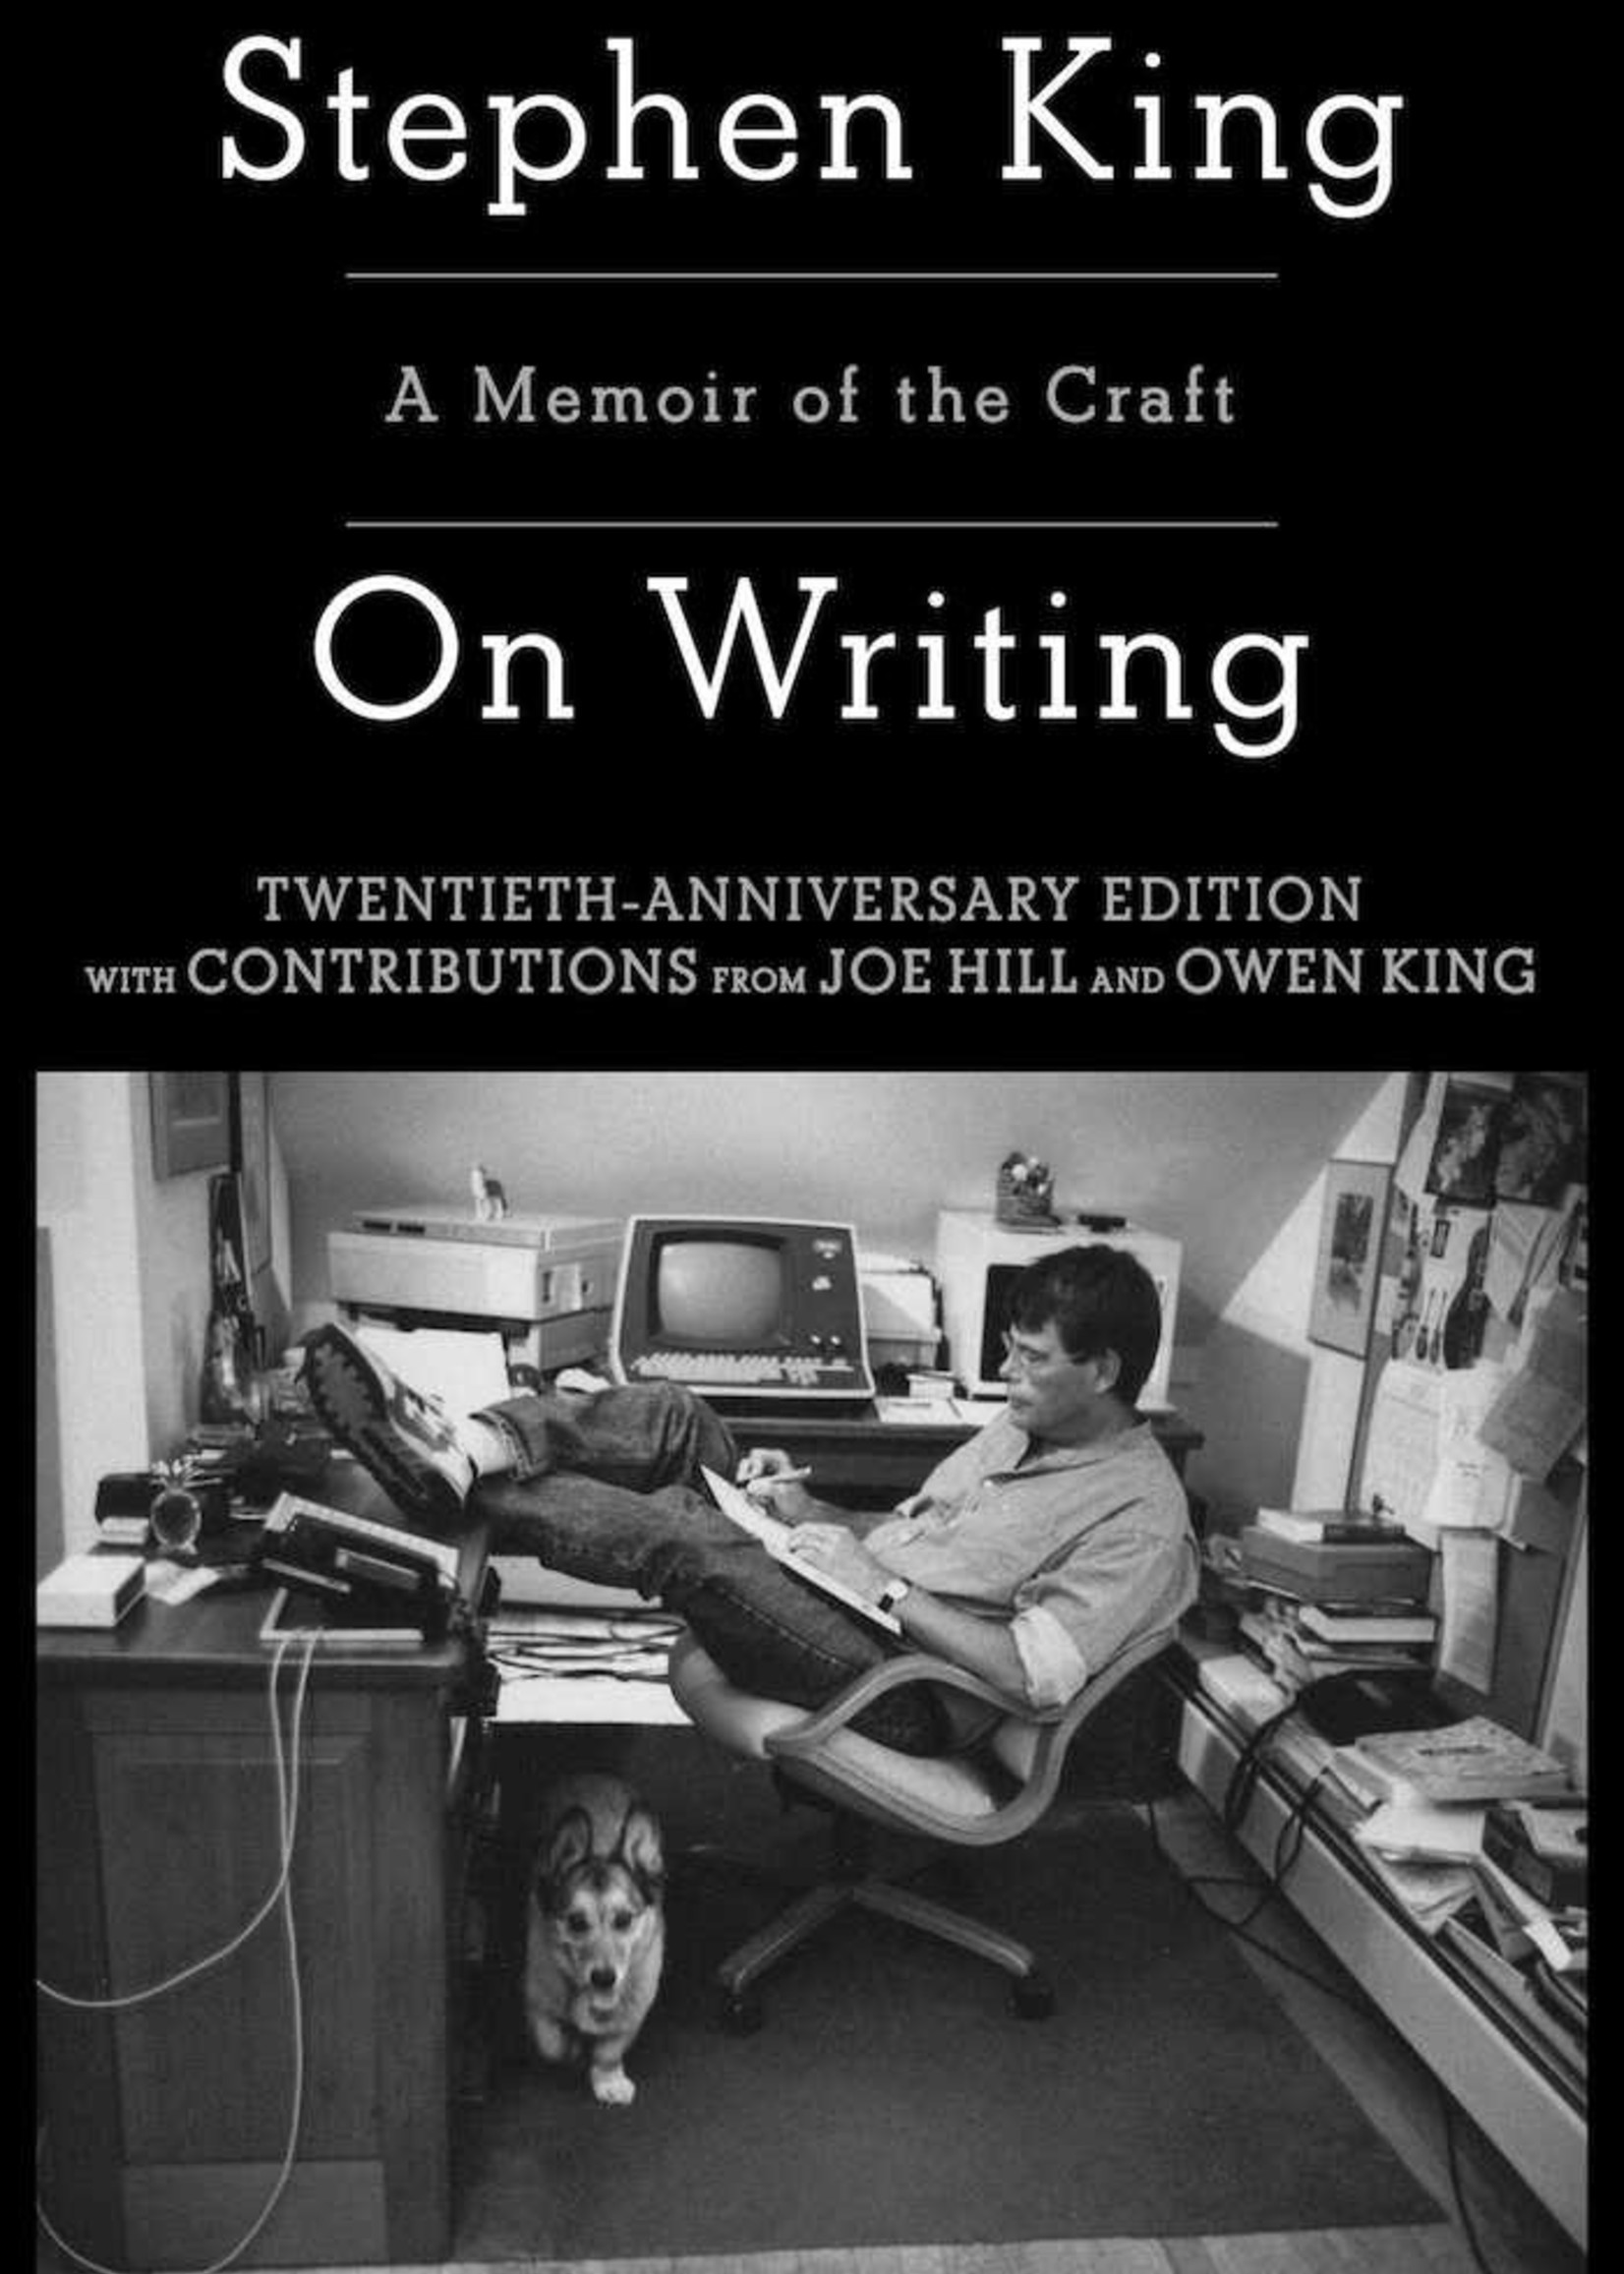 On Writing: A Memoir of the Craft byStephen King